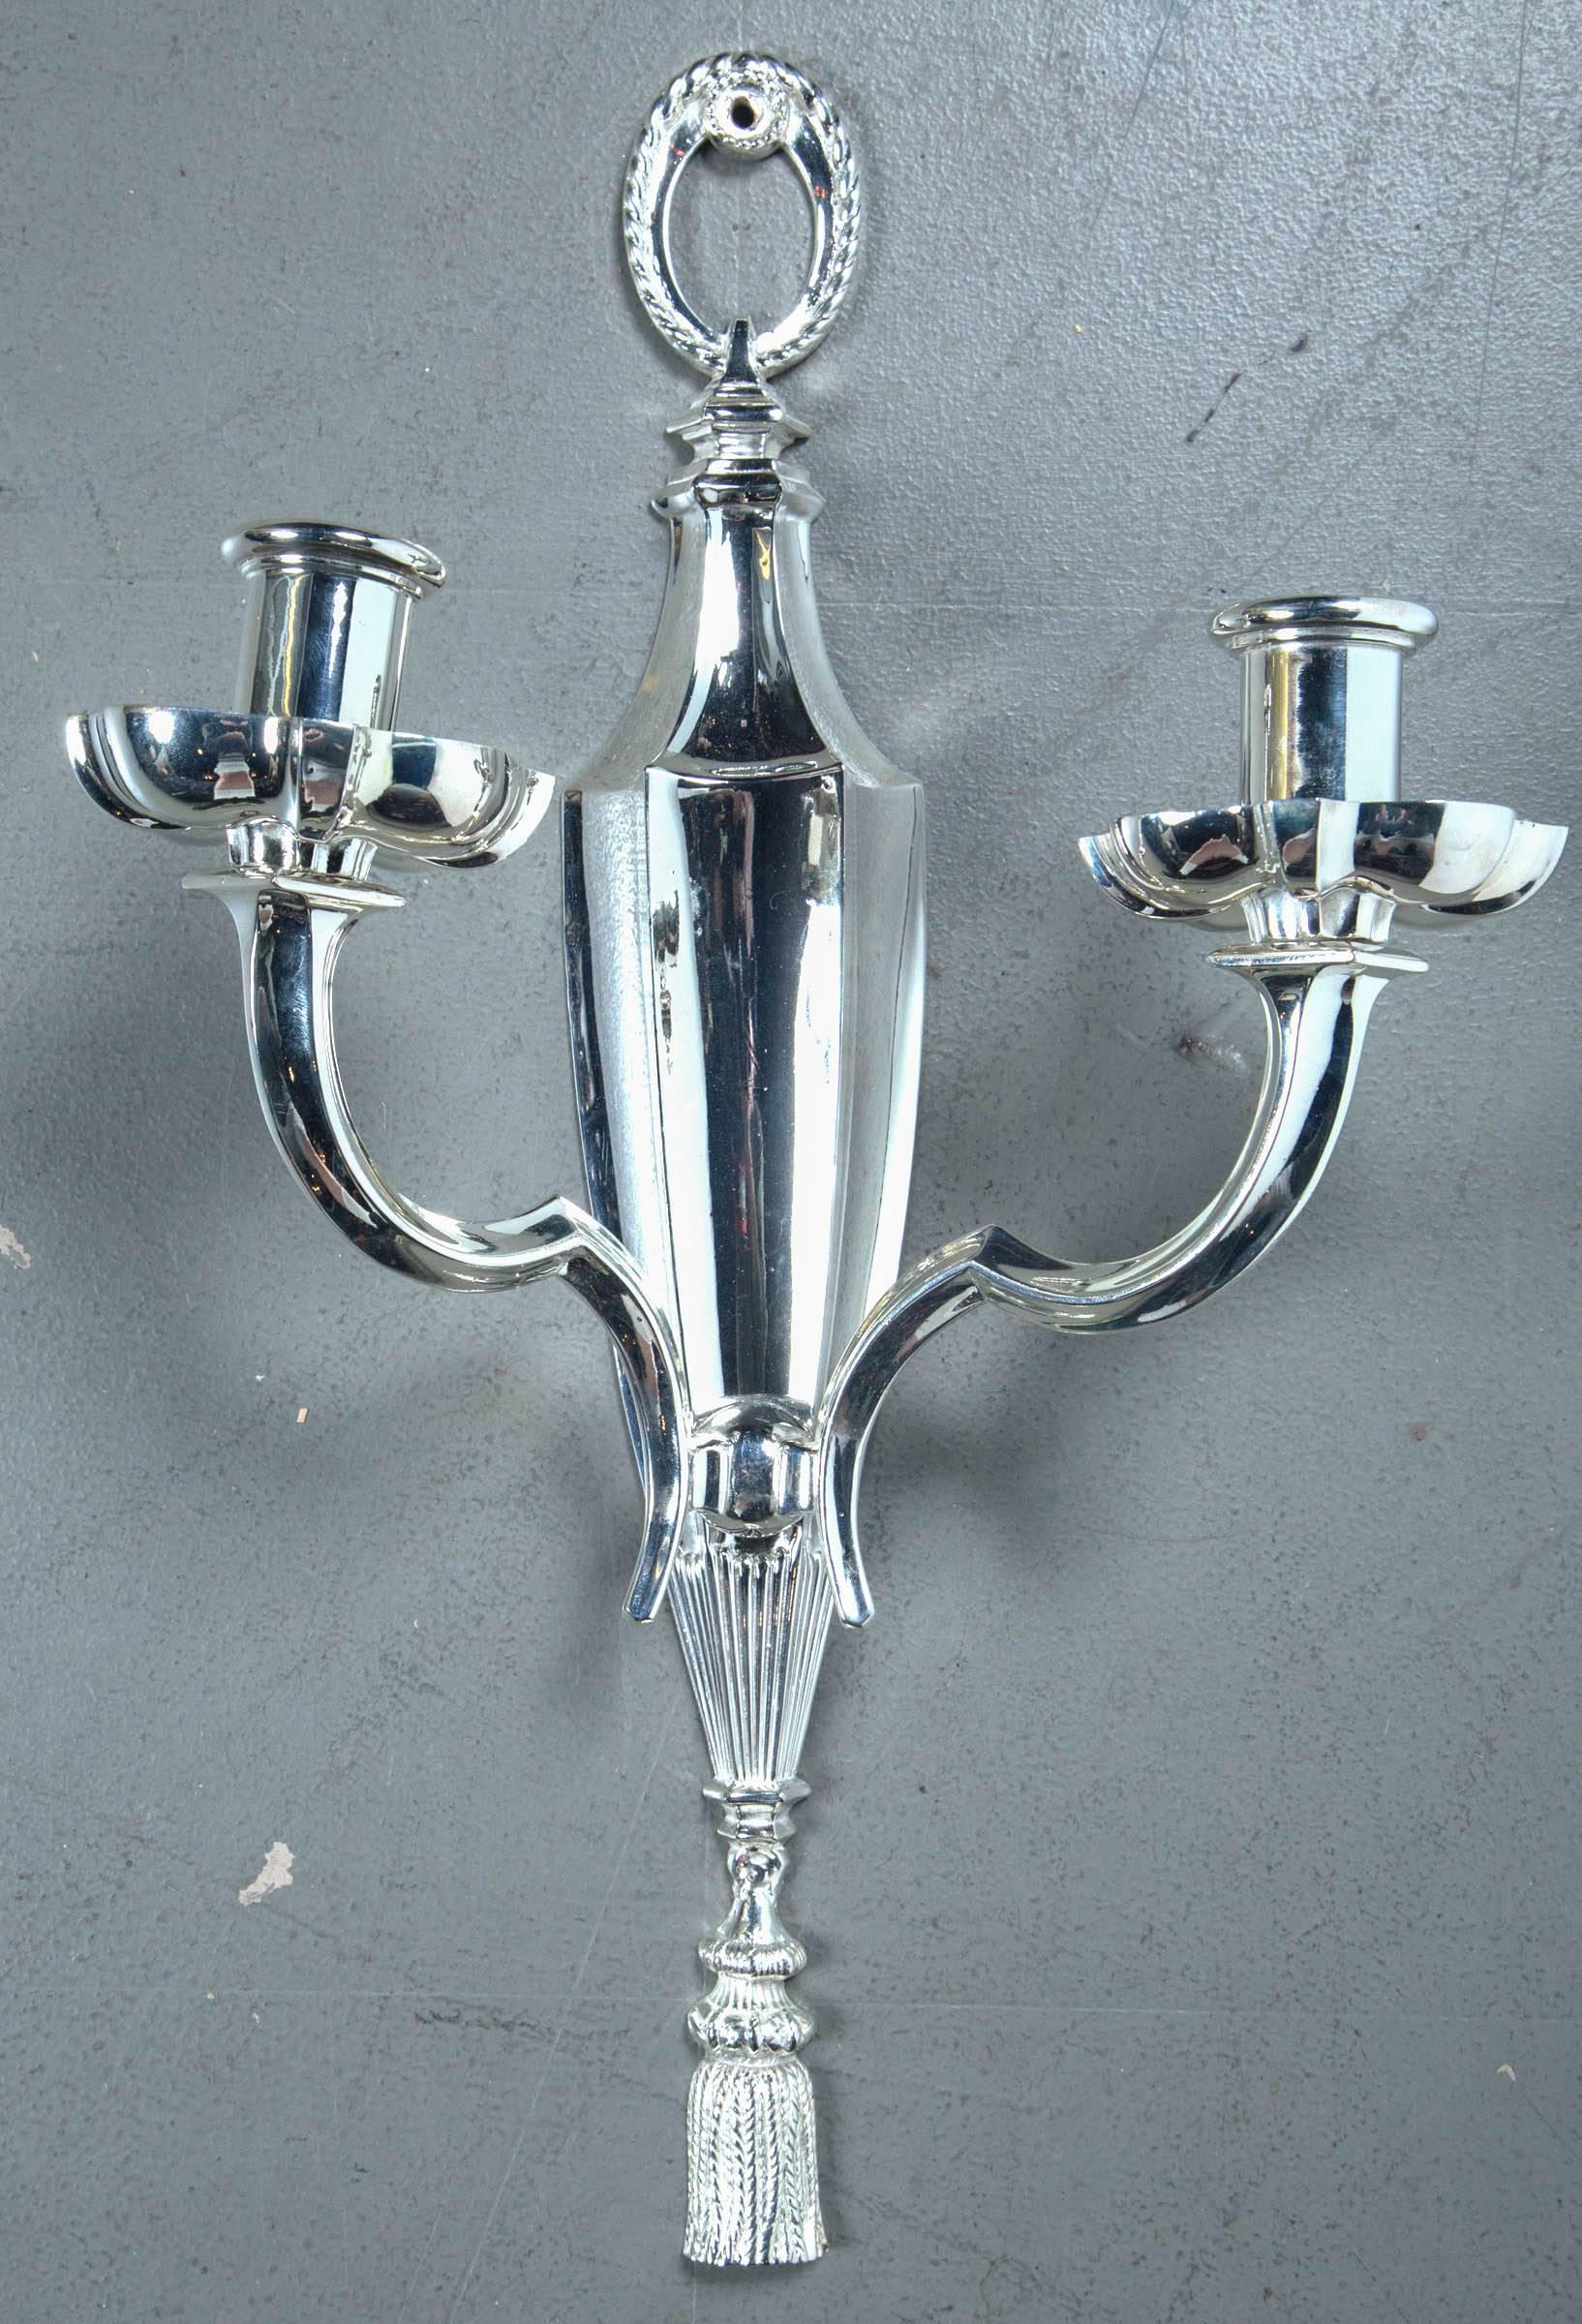 A set of 12, circa 1920s Caldwell sconces; $6,800 list pair, six pairs available.